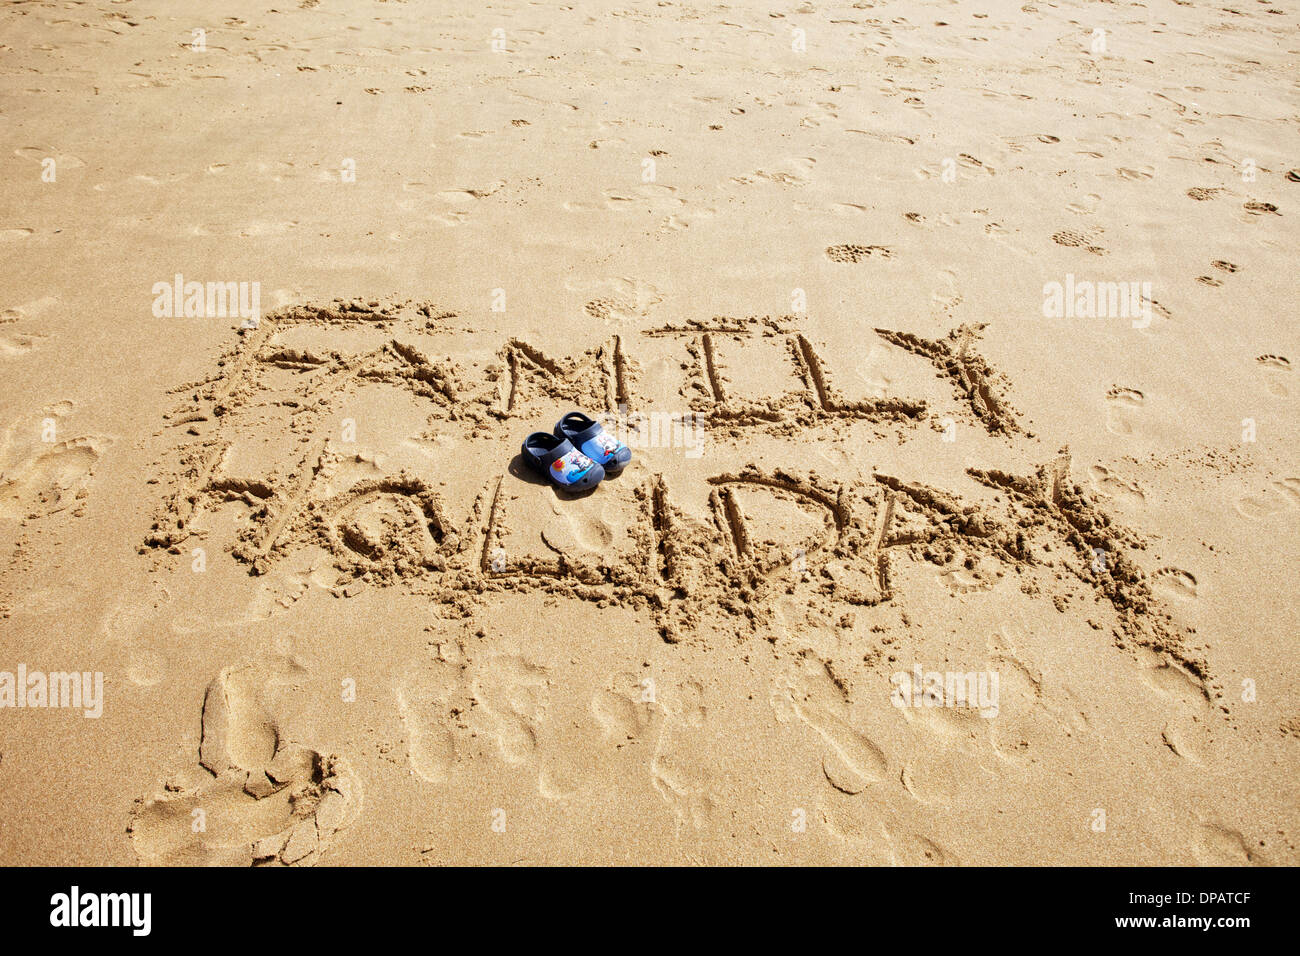 Messages and words written in the sand on a beach with kids crocs in pink and blue in picture. Topical for travel agents and holidays Stock Photo